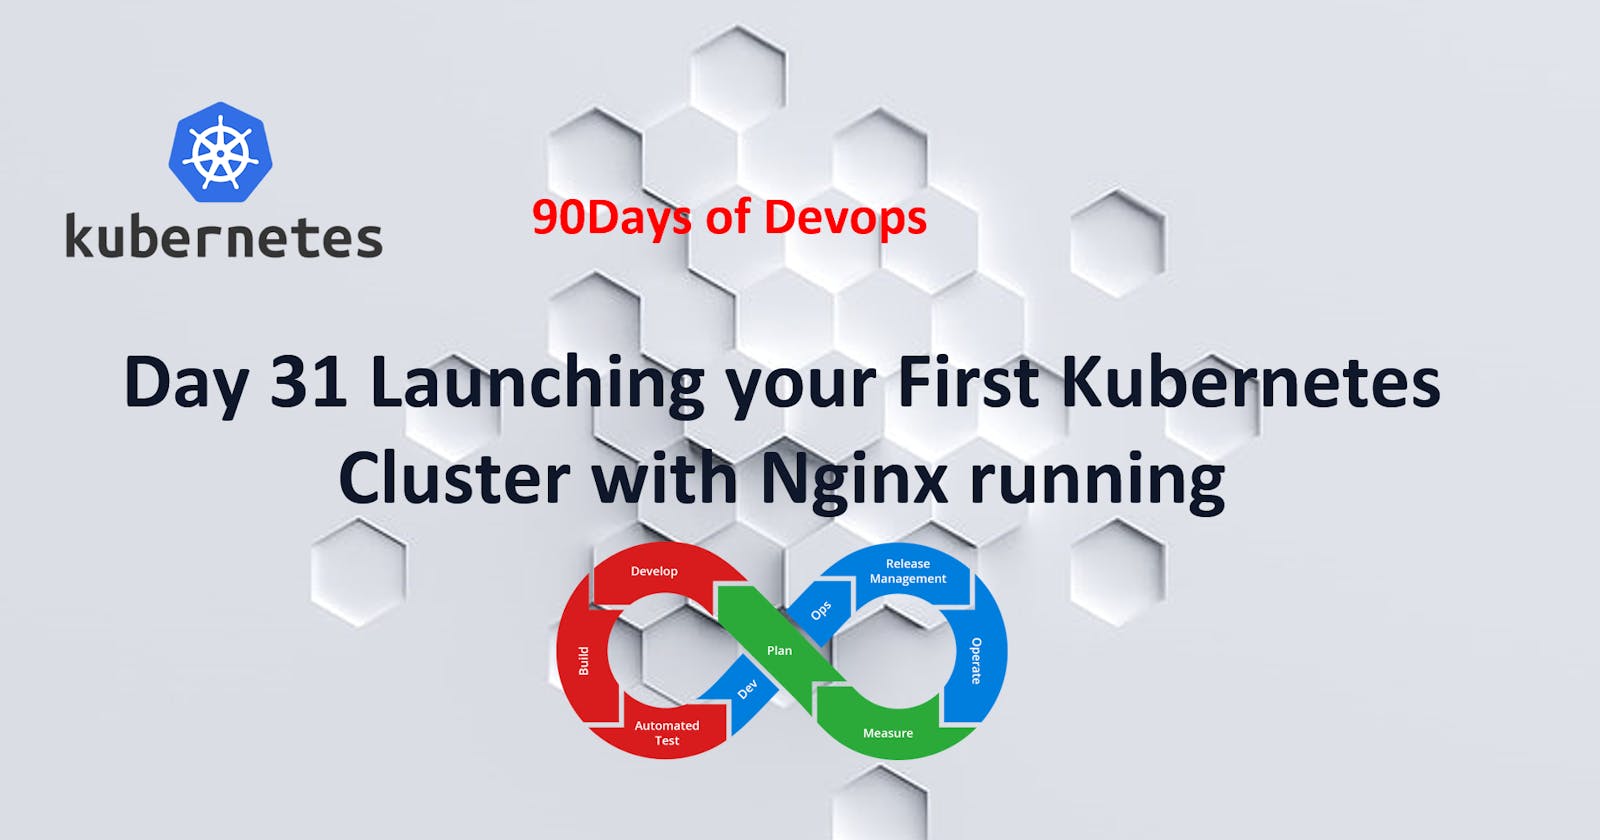 Day 31 Launching your First Kubernetes Cluster with Nginx running